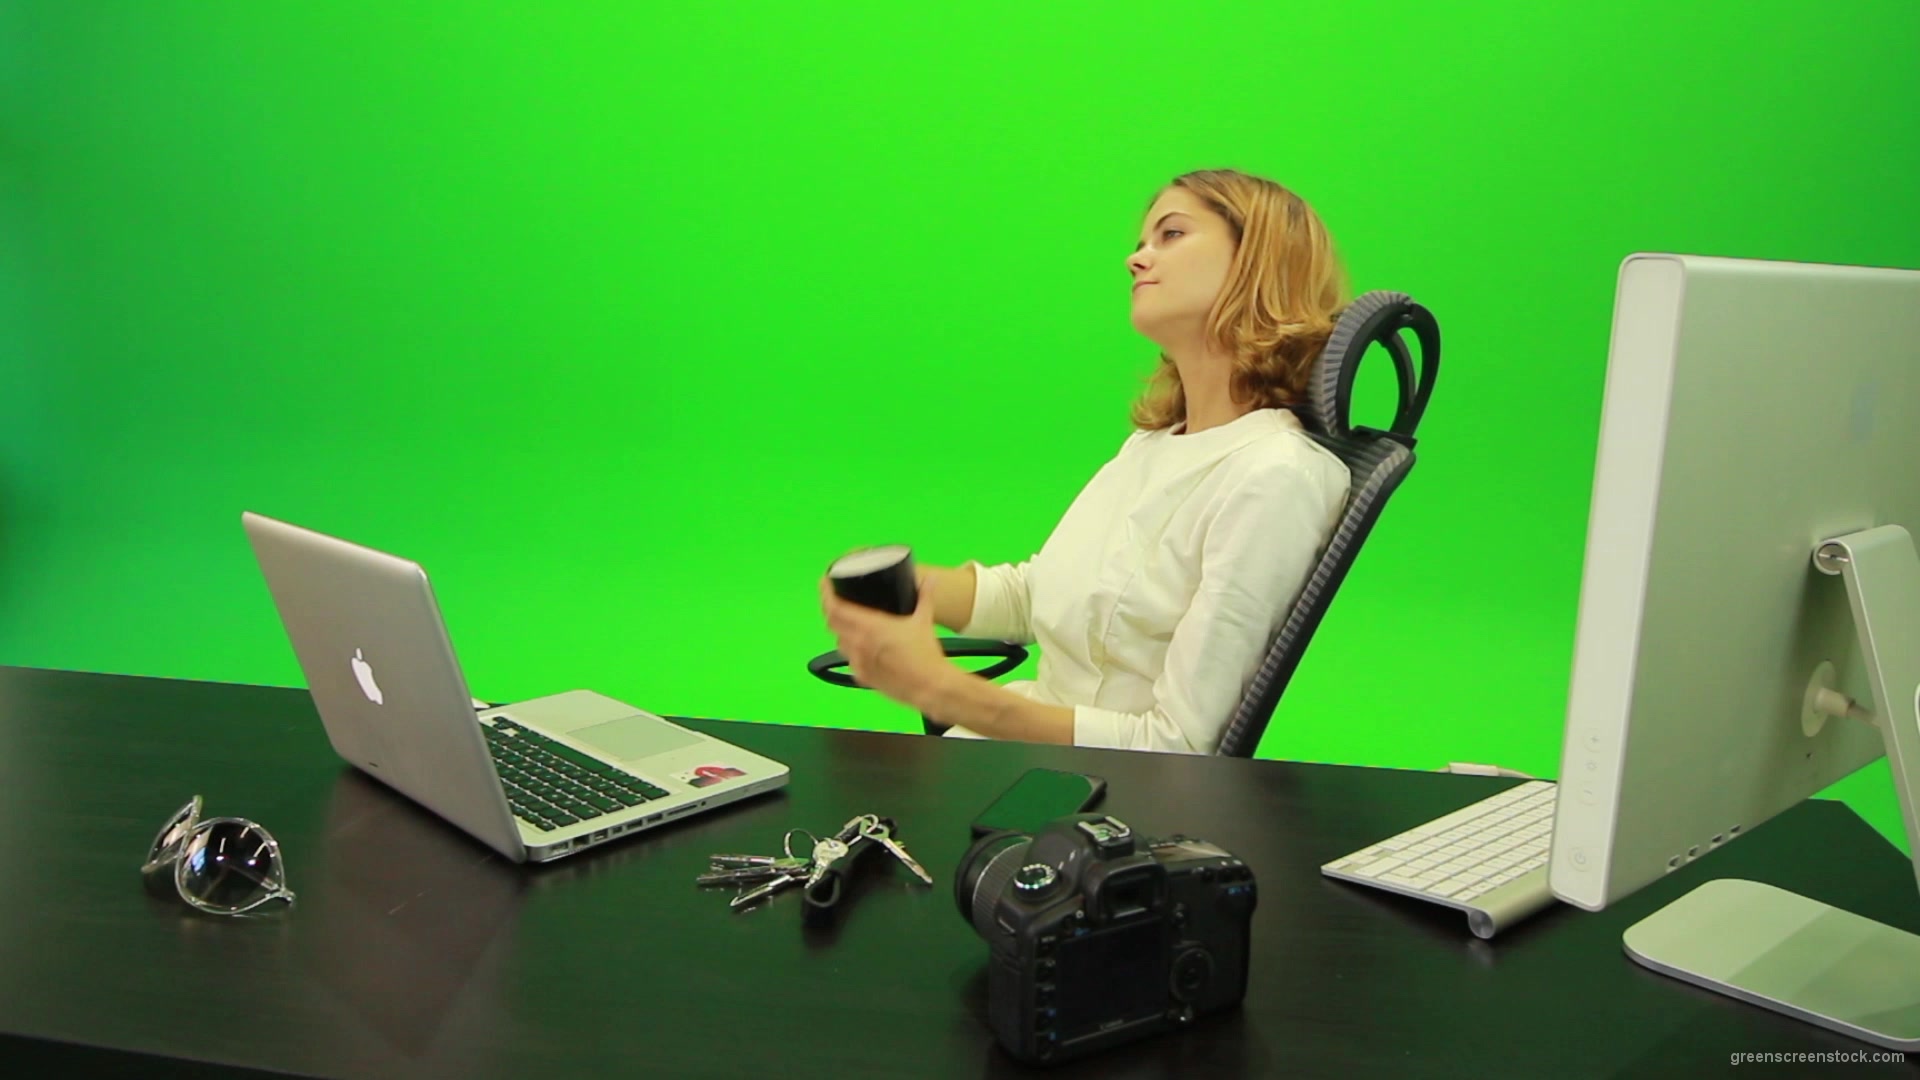 Business-Woman-Relaxing-and-Drinking-Coffee-after-Hard-Work-Green-Screen-Footage_008 Green Screen Stock